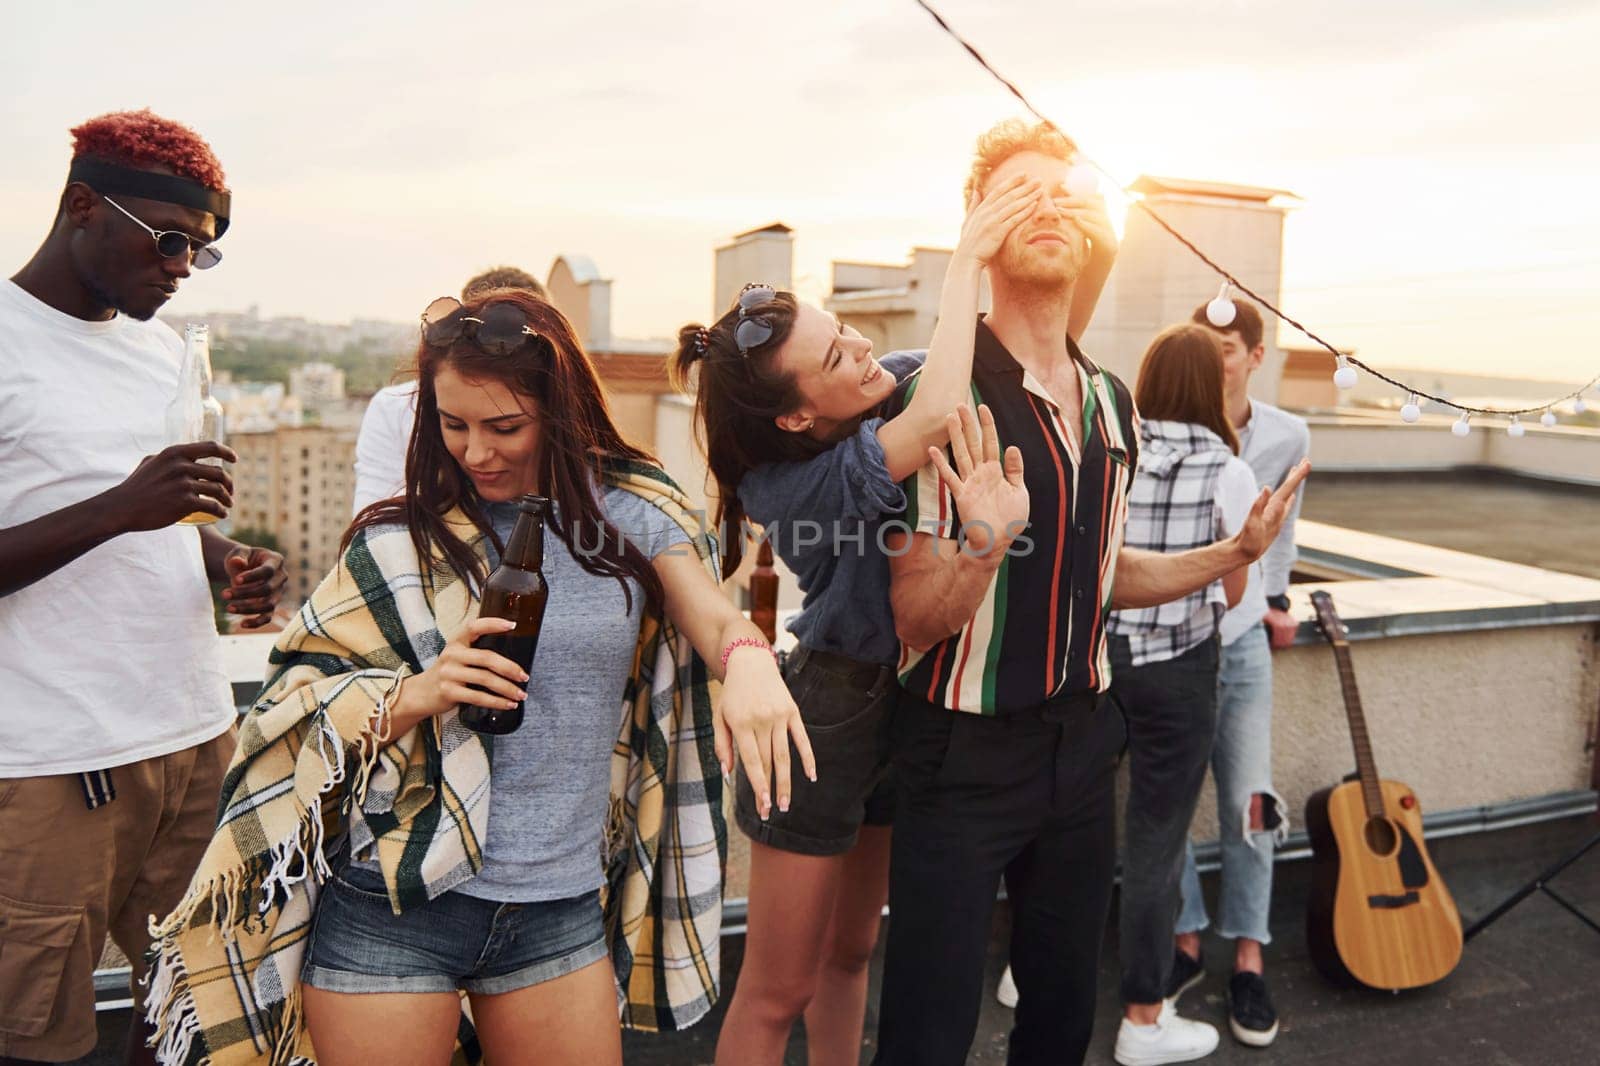 Playing game. Man's eyes covered by hands. Group of young people in casual clothes have a party at rooftop together at daytime.